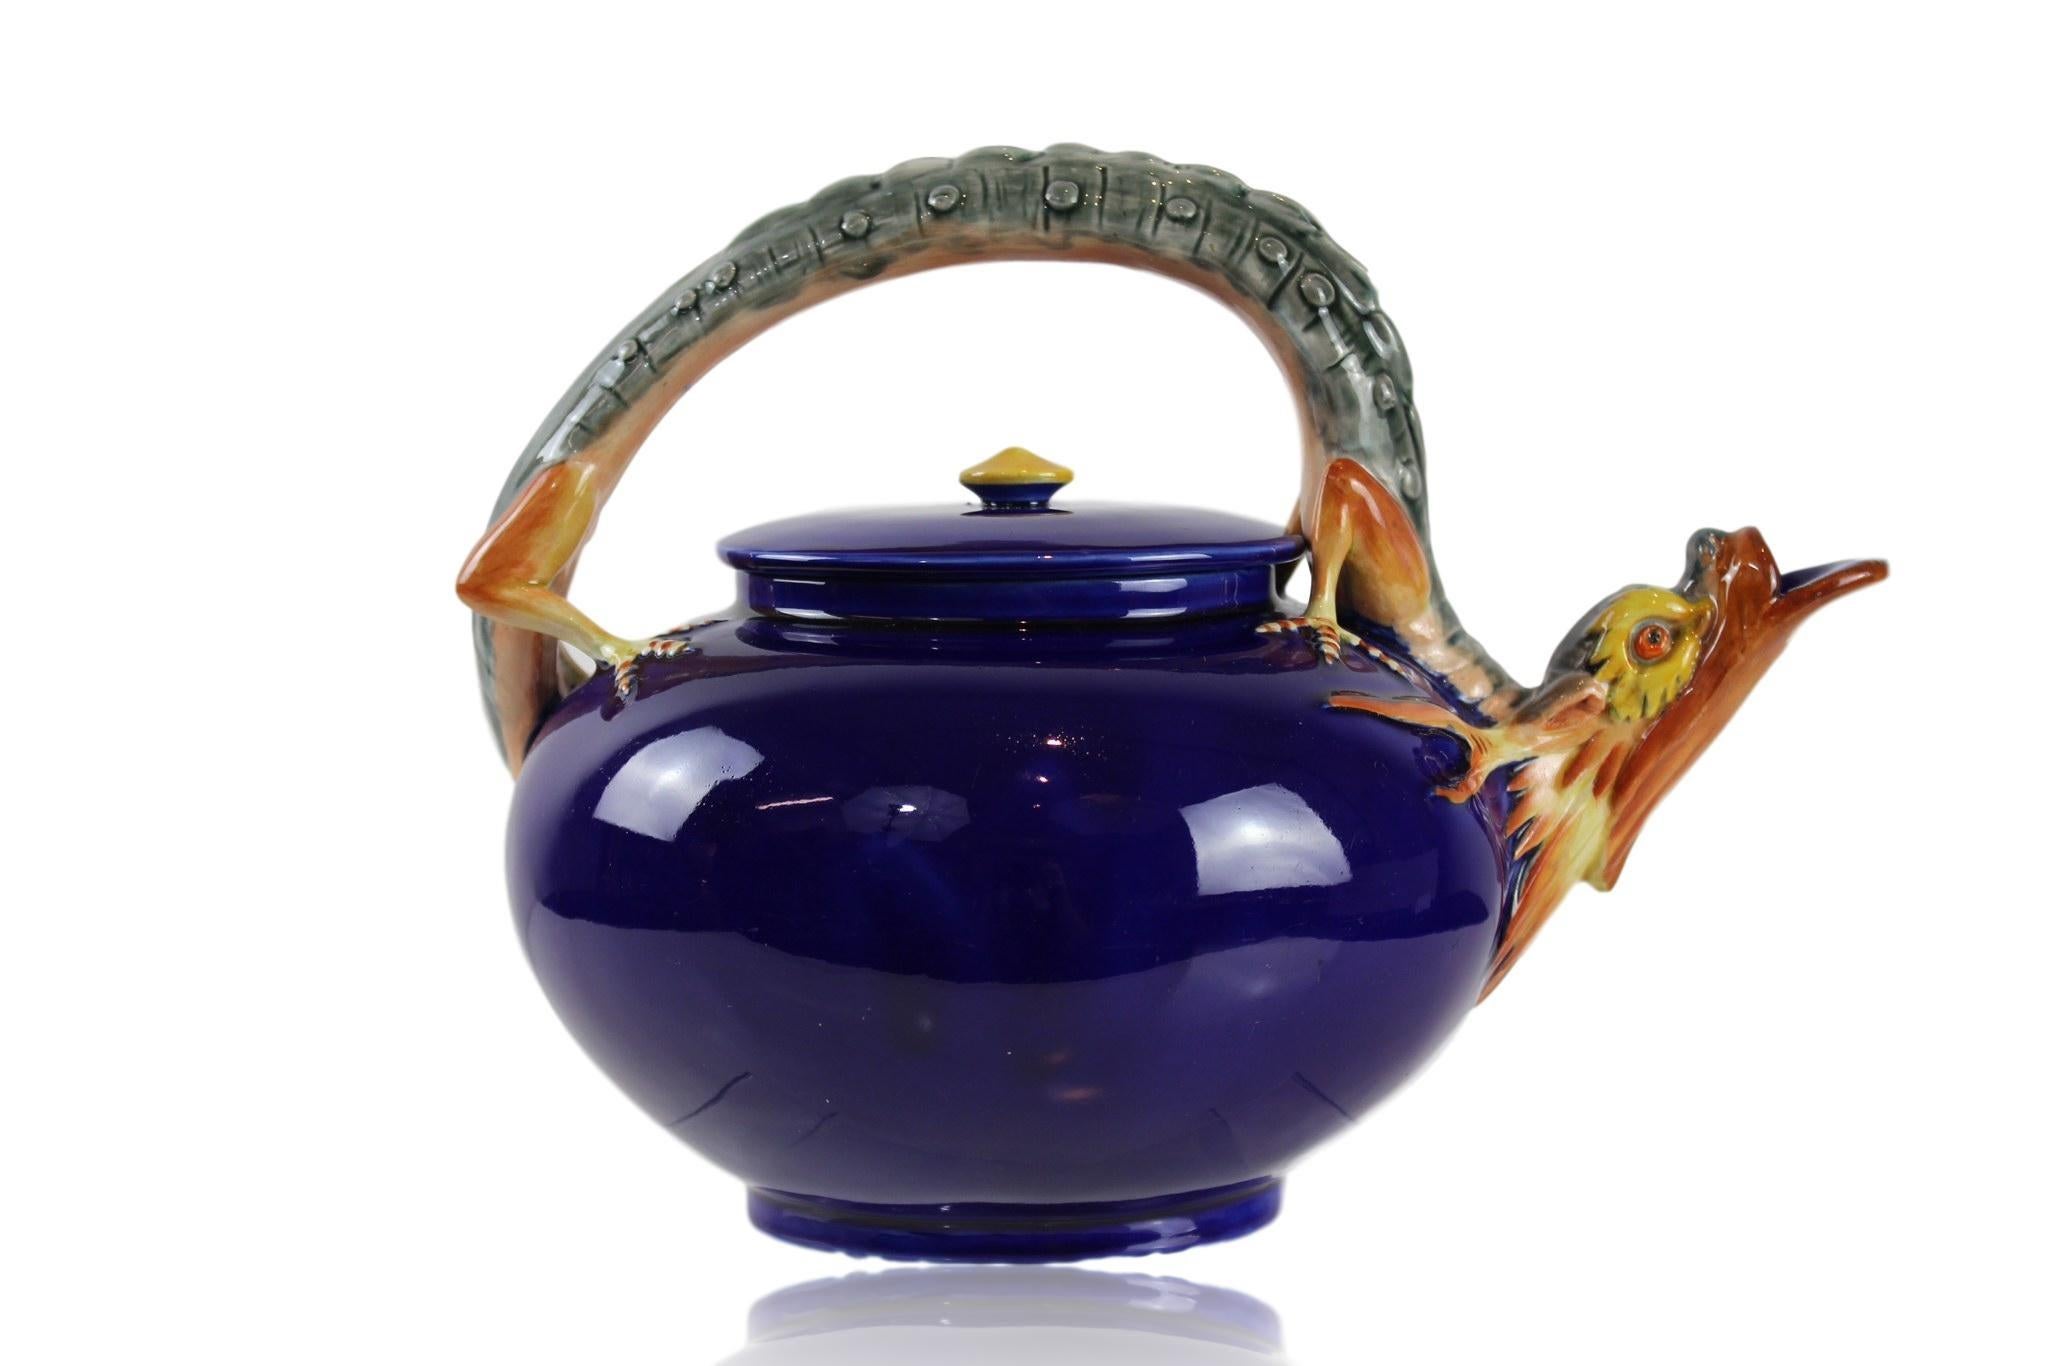 Molded Wedgwood Majolica Dragon Teapot in Cobalt Blue by Hugues Protât, Dated 1871